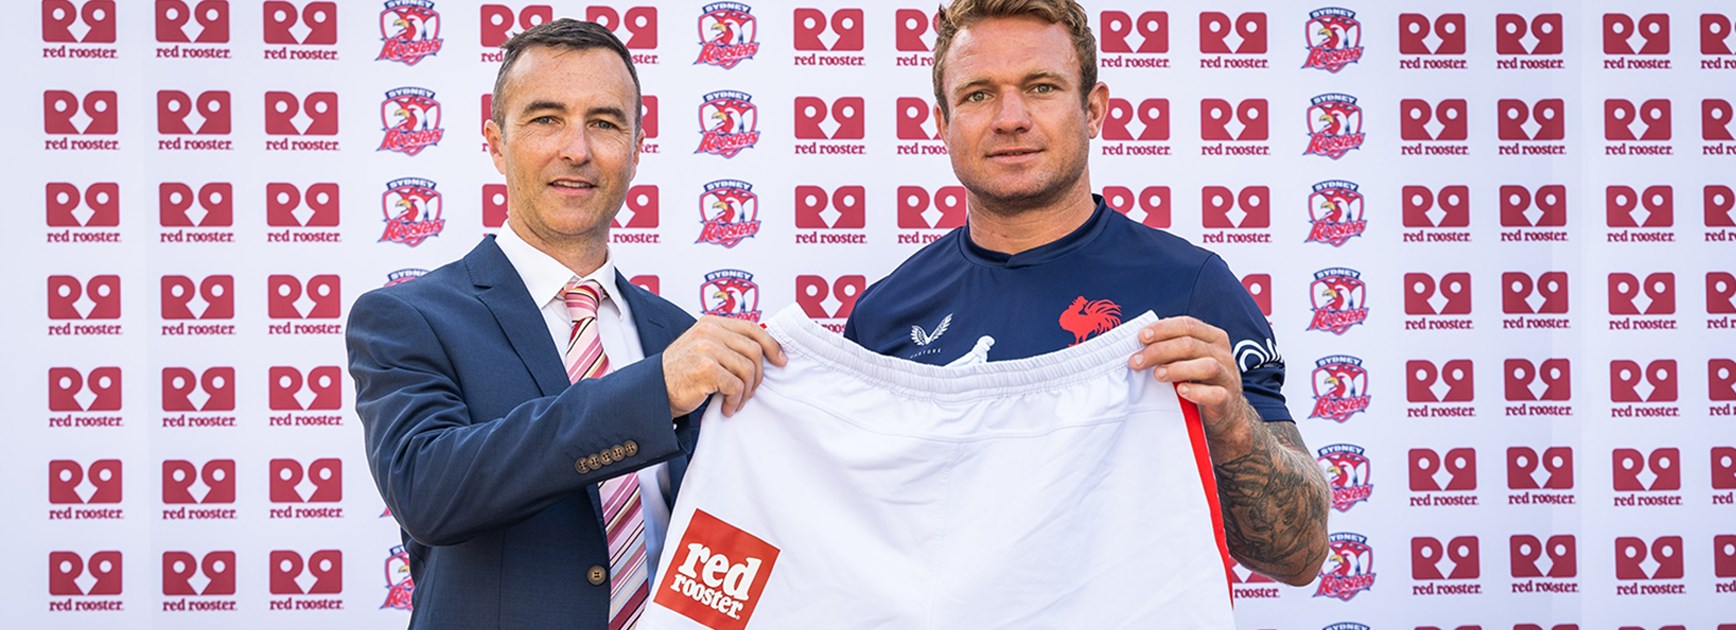 The Rooster’s calling: Red Rooster extend partnership with Sydney Roosters